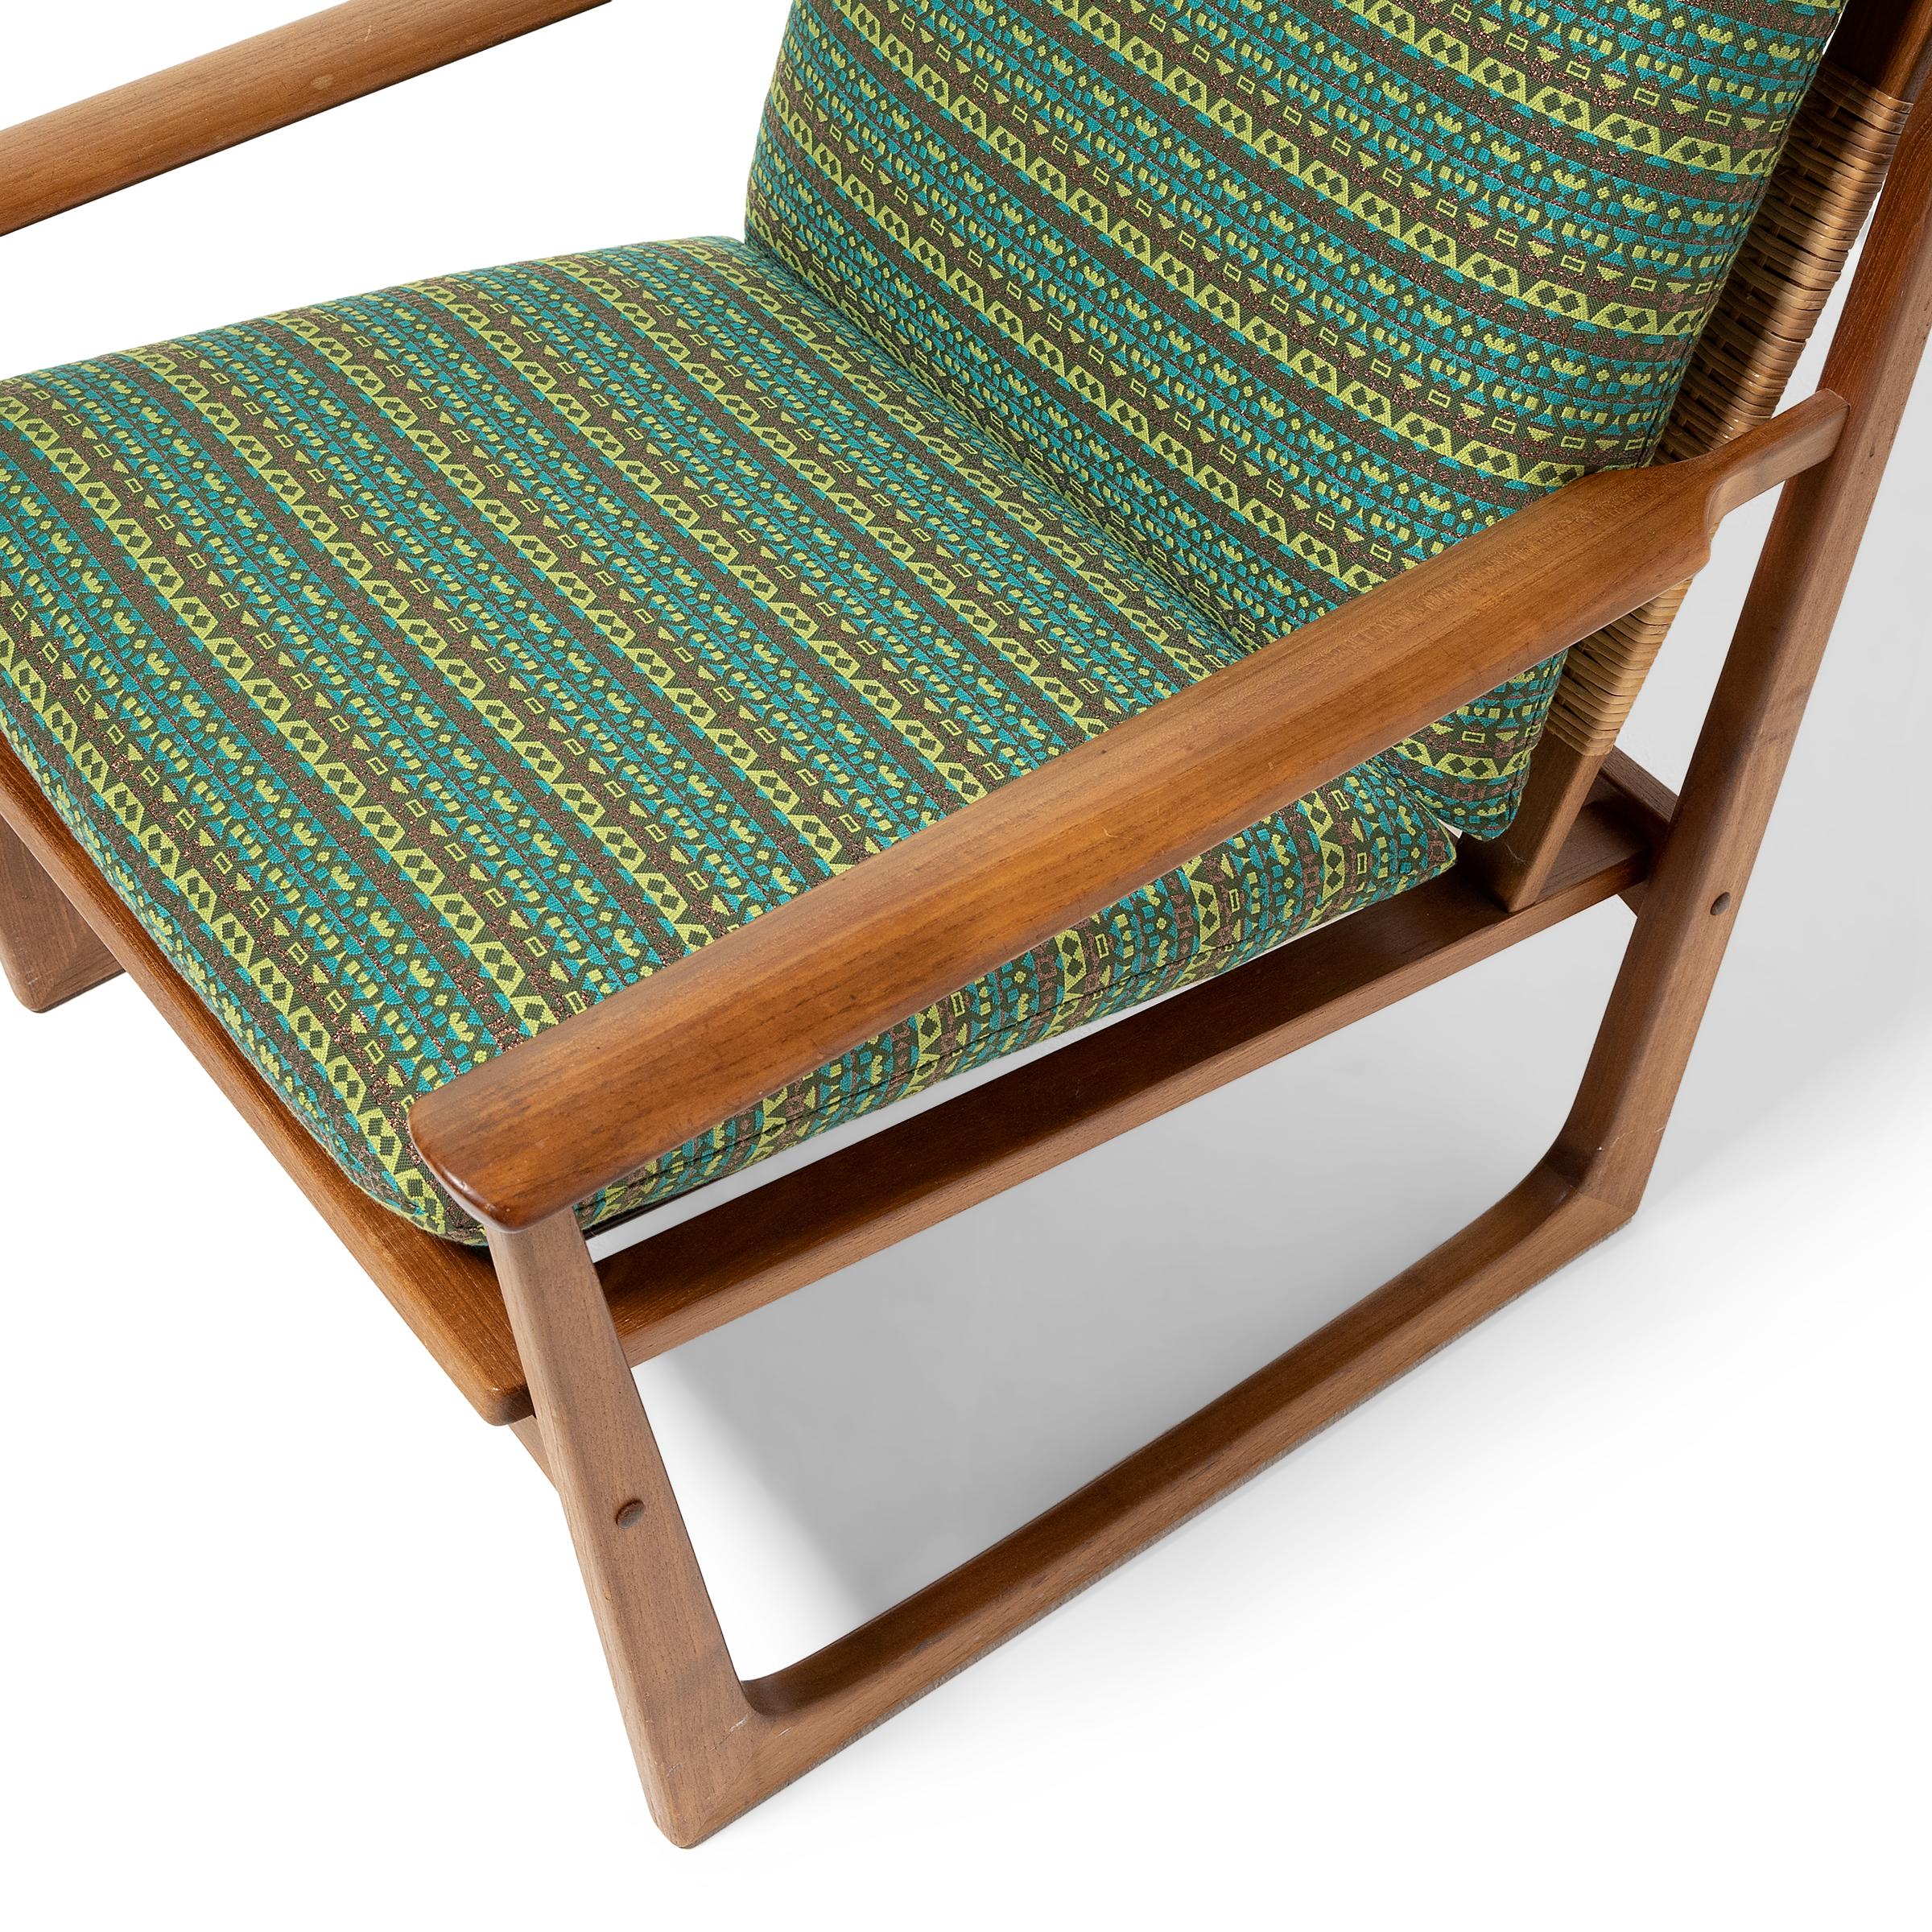 Upholstery Pair of Danish Modern Cane Back Armchairs by Hans Olsen, c. 1960 For Sale